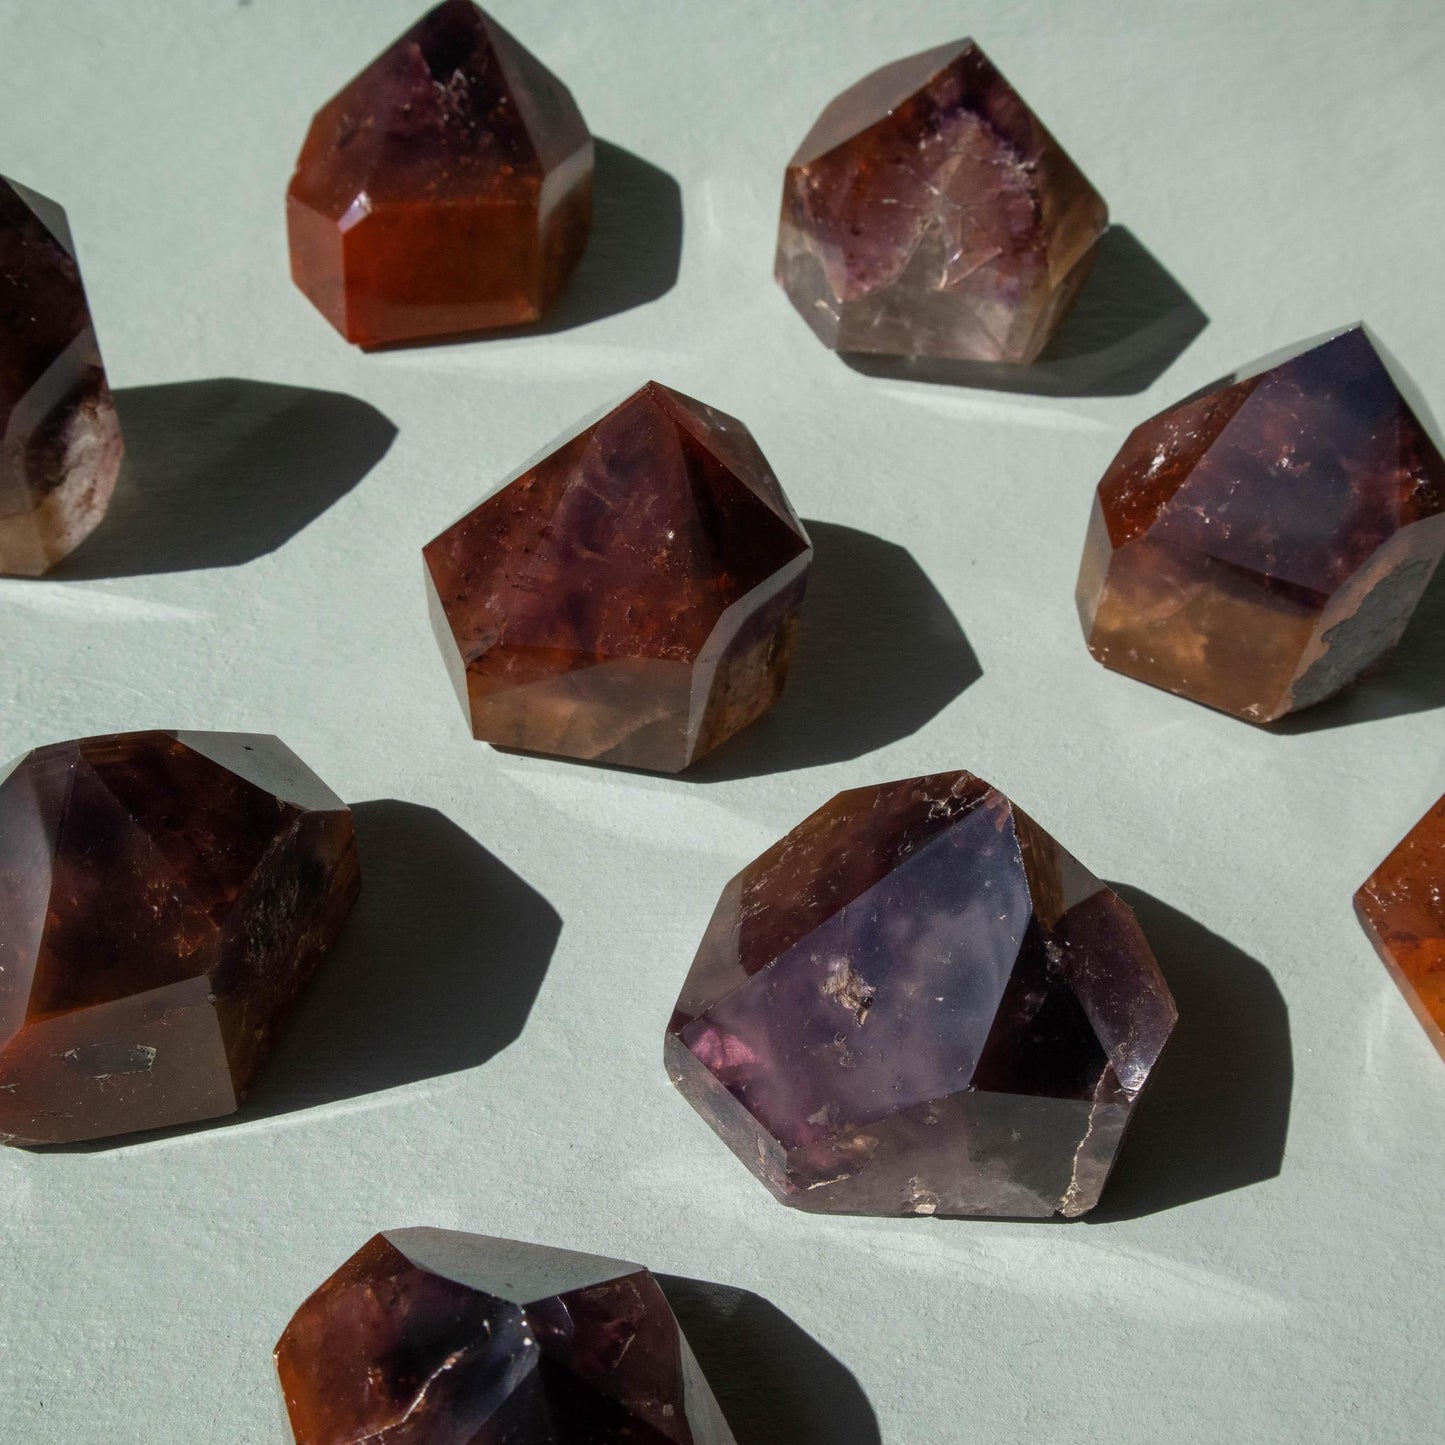 super 7, super 7 polished point, crystal point, gemstone point, super 7 crystal, super 7 stone, super 7 gemstone, super 7 properties, super 7 healing properties, super 7 metaphysical properties, super 7 meaning